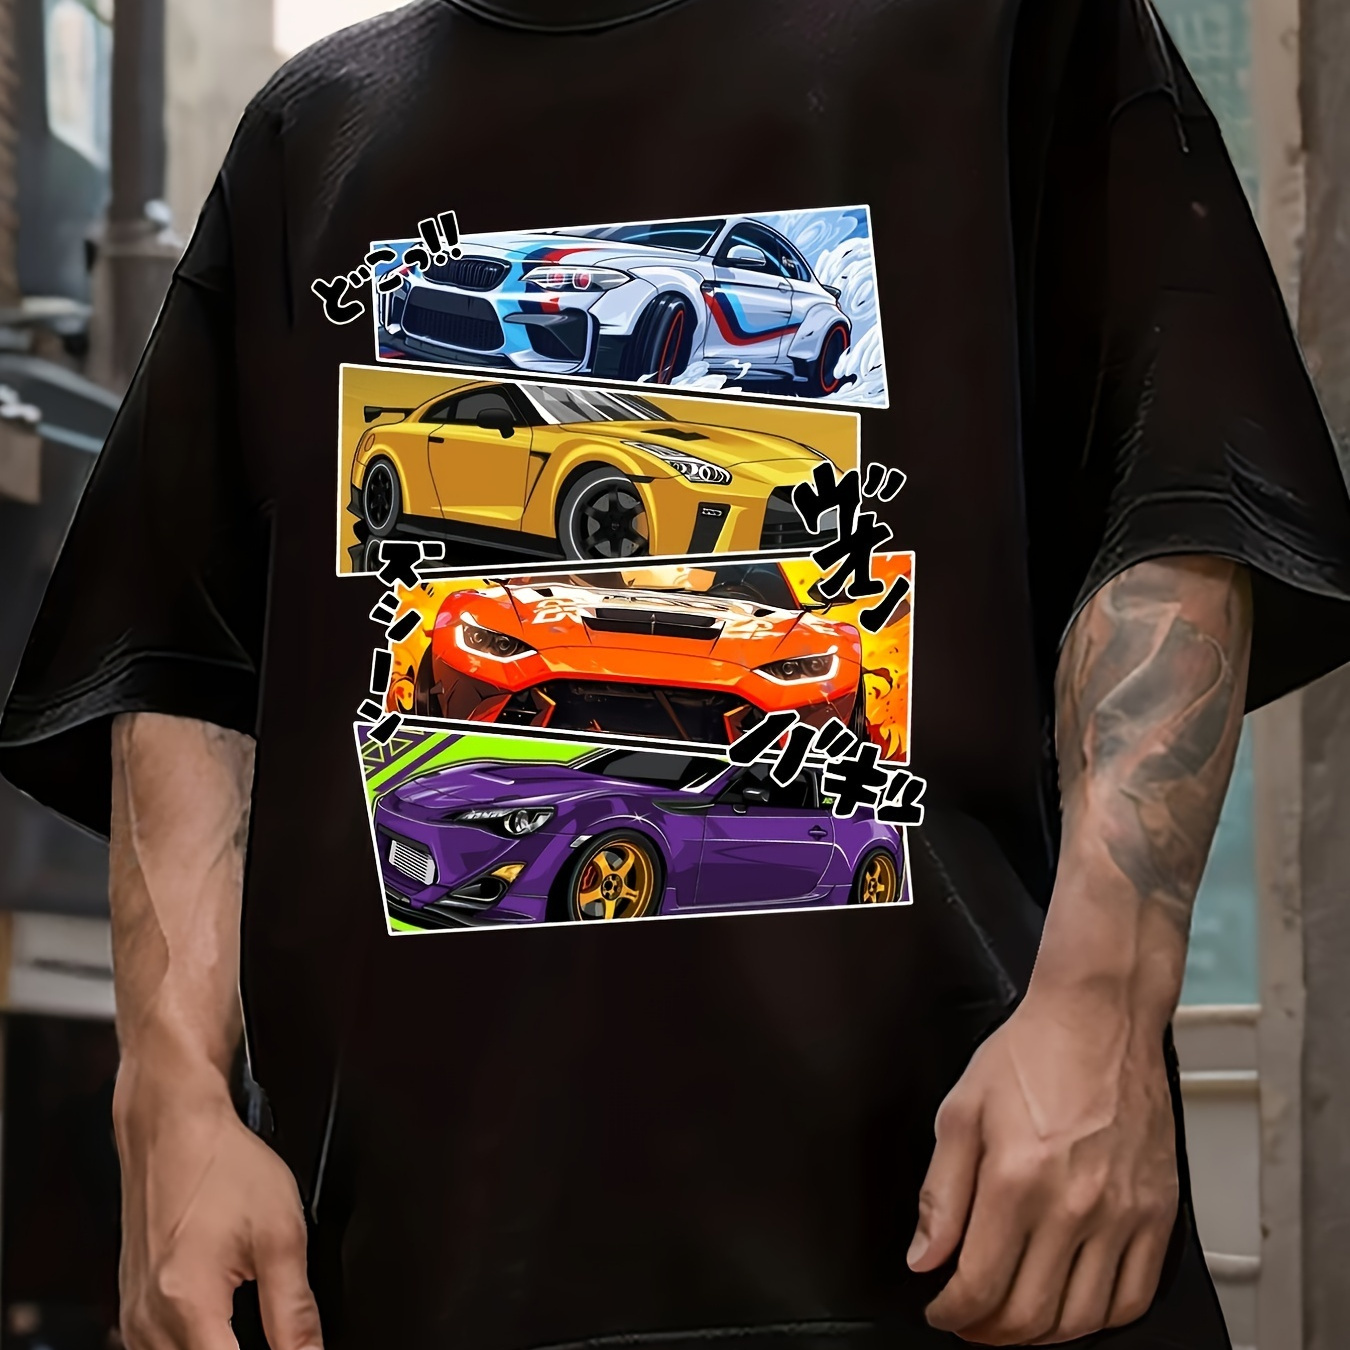 

Anime Racing Car Japanese Style Print, Men's Summer Casual Short Sleeve T-shirt, Round Neck, Comfy And Simple Fit, Versatile Outdoor Top For Daily Wear